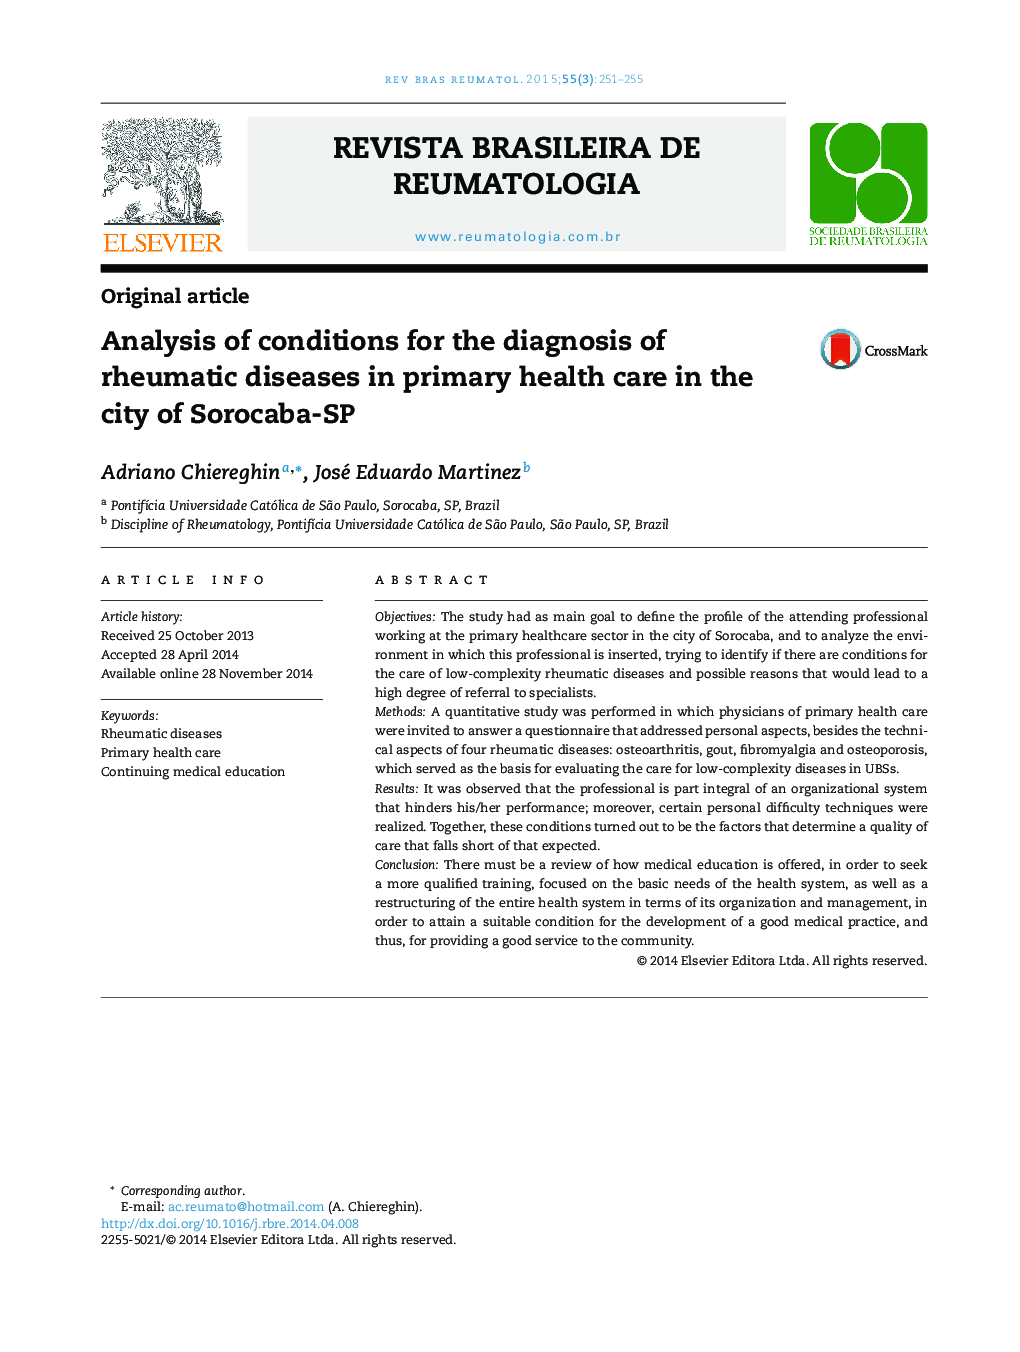 Analysis of conditions for the diagnosis of rheumatic diseases in primary health care in the city of Sorocaba-SP